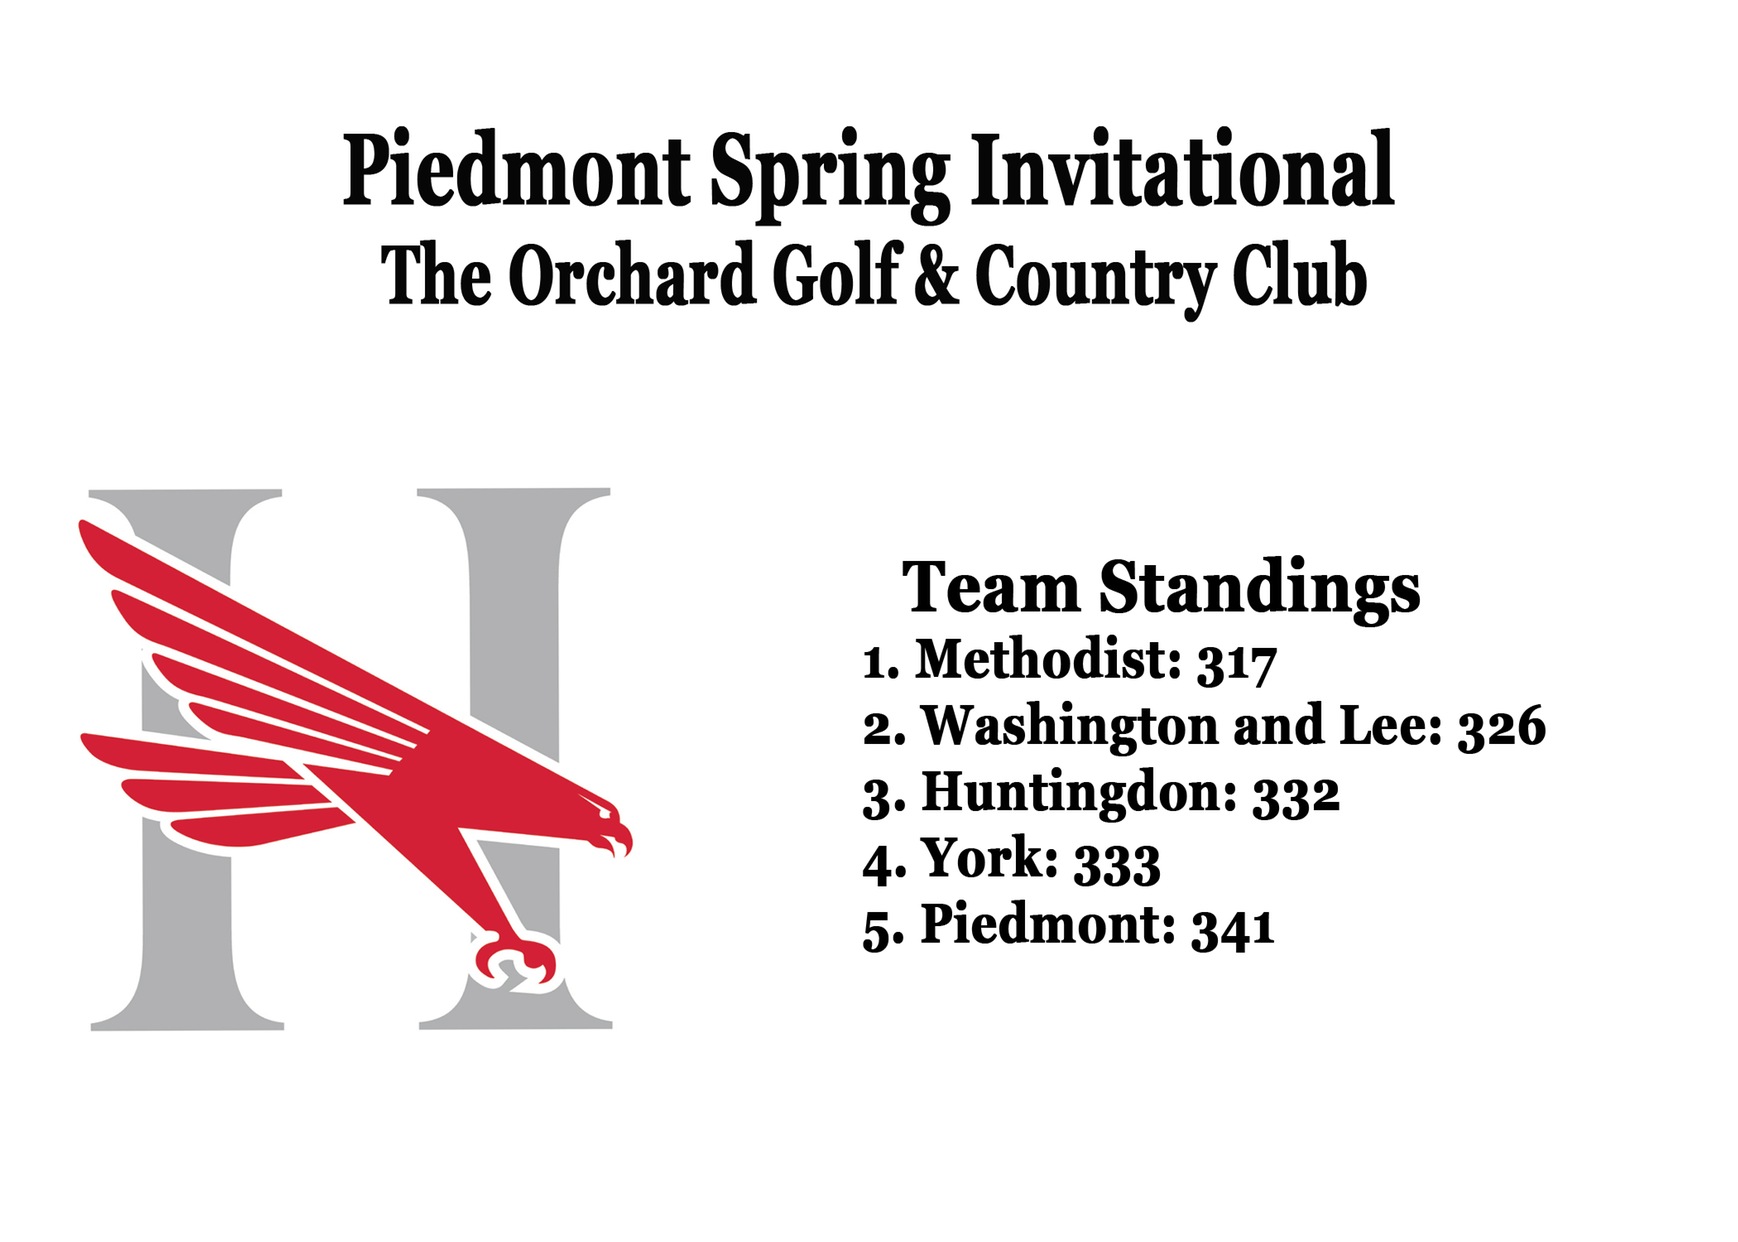 Lady Hawks in 3rd after Rd. 1 of Piedmont Spring Invitational